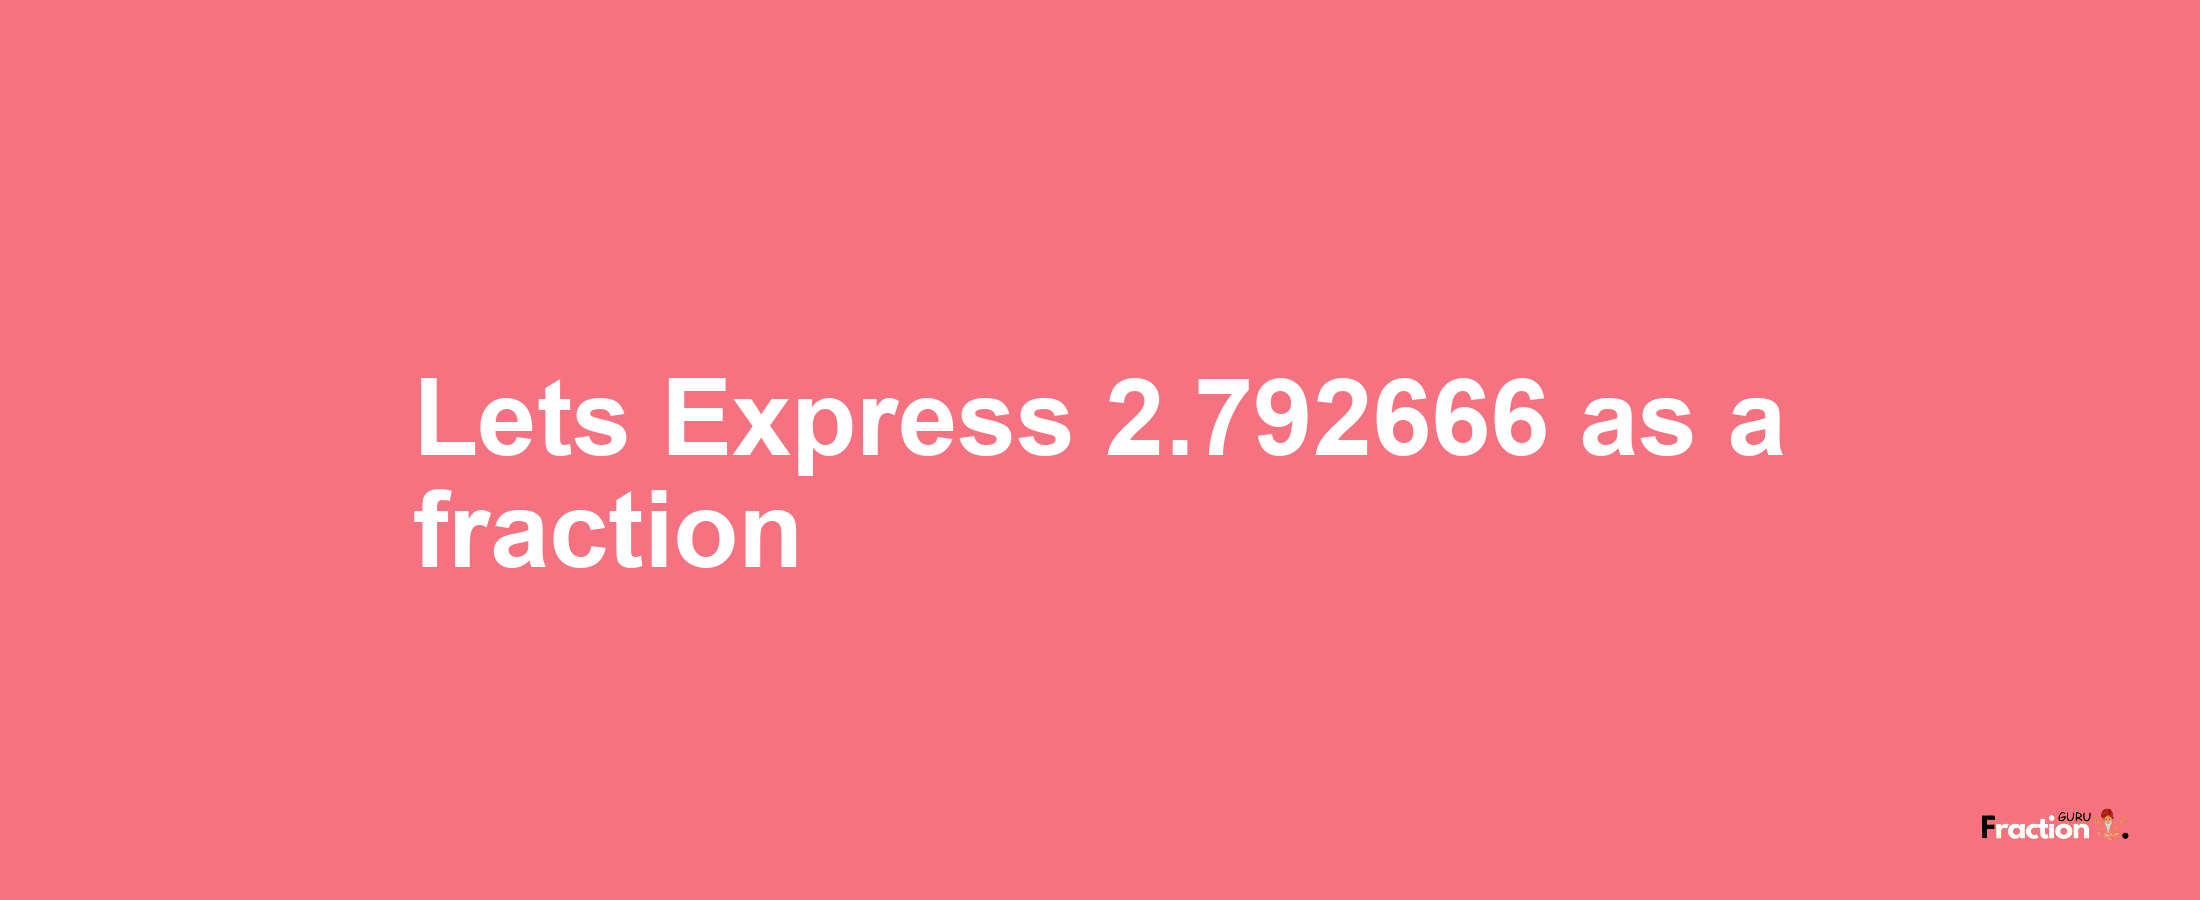 Lets Express 2.792666 as afraction